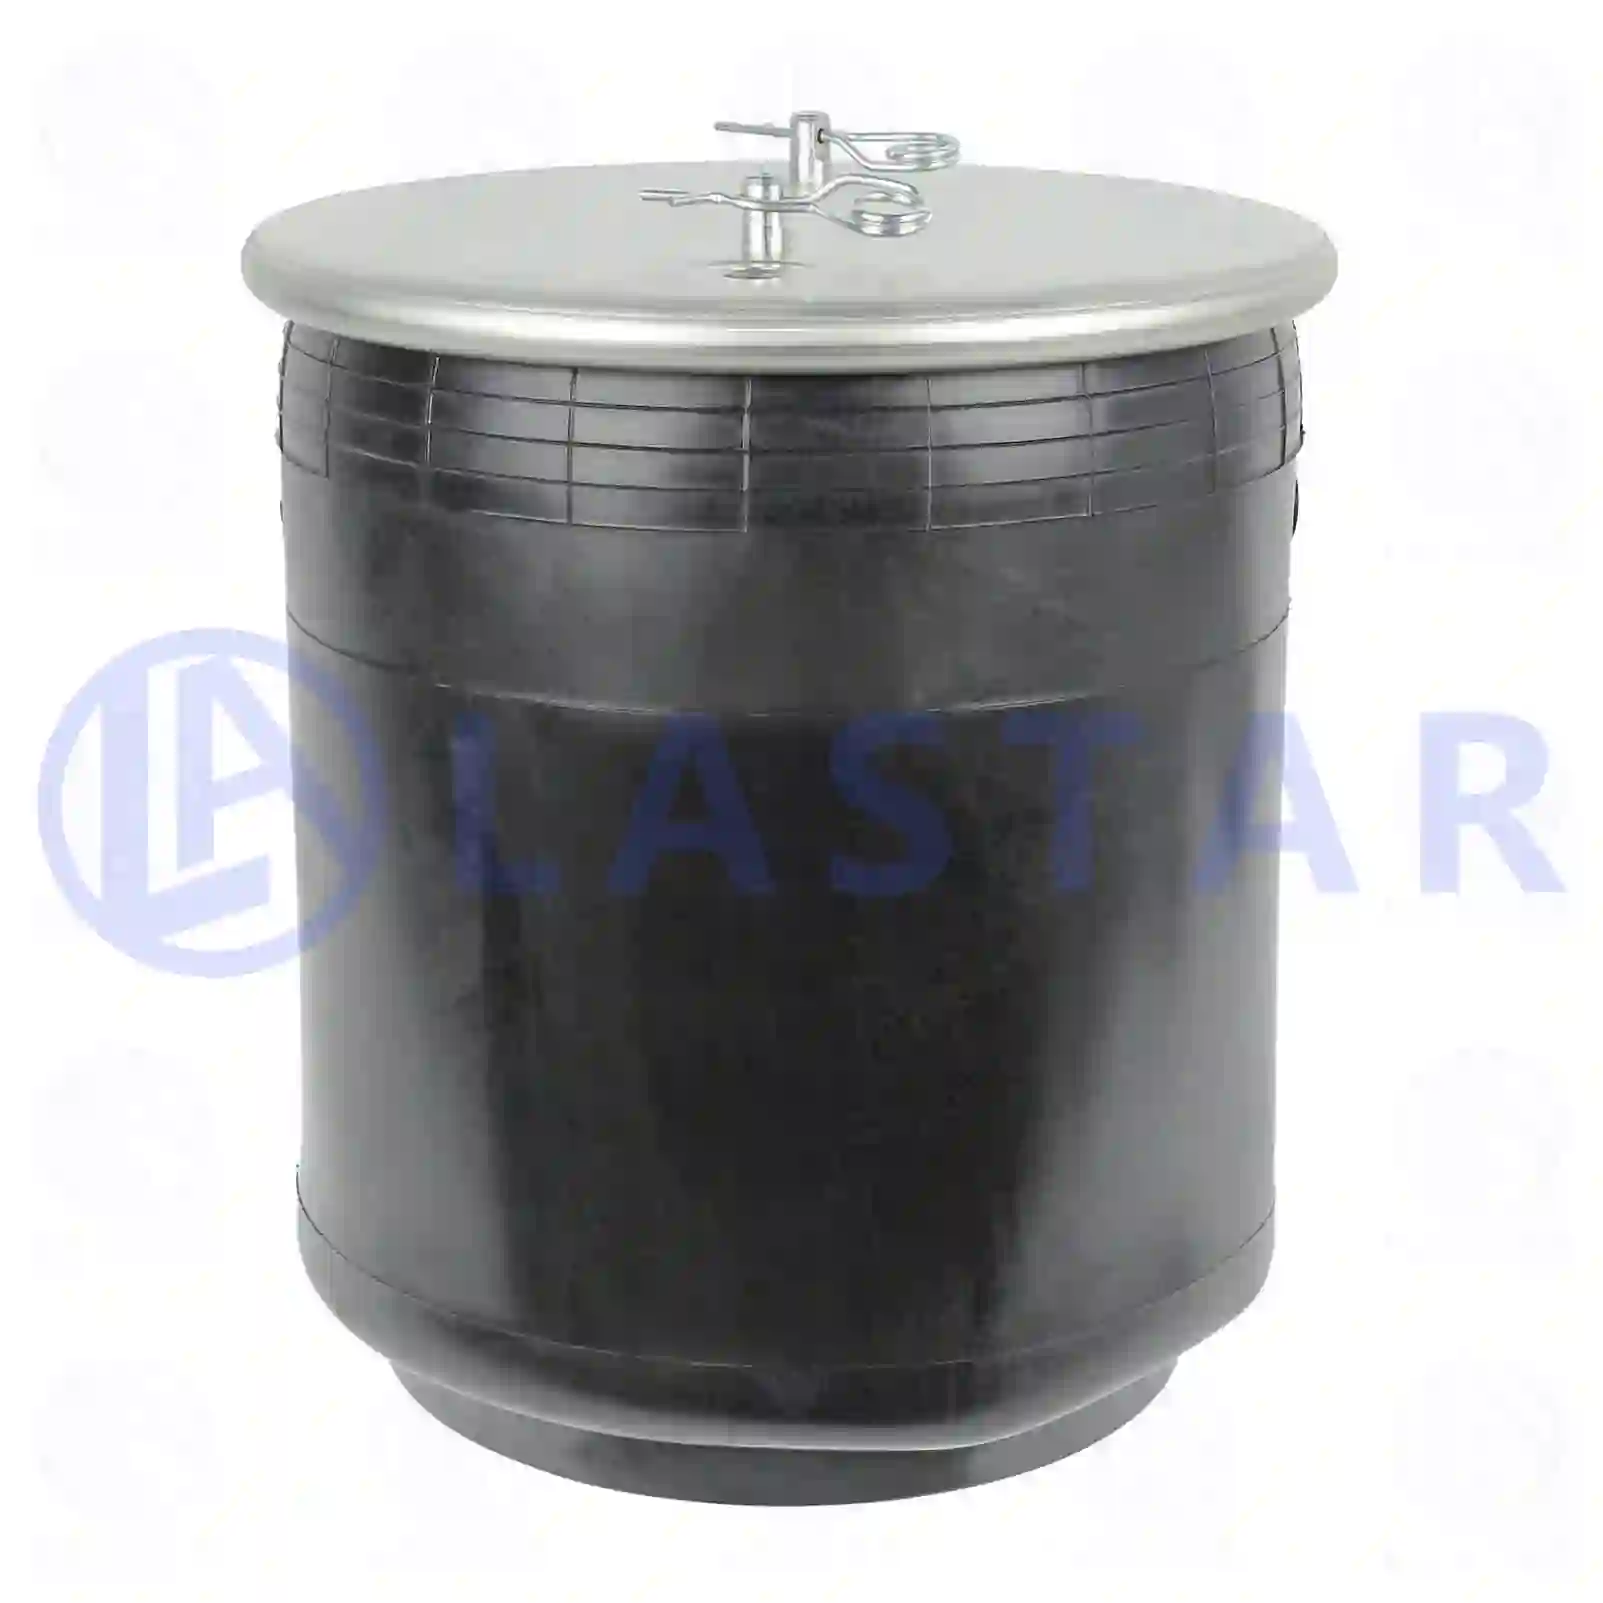 Air spring, with steel piston, 77728687, MLF7081, MLF7139, 1379392, 1422750, 1440294, 1510195, 1543691, 1731113, 543691, ZG40737-0008 ||  77728687 Lastar Spare Part | Truck Spare Parts, Auotomotive Spare Parts Air spring, with steel piston, 77728687, MLF7081, MLF7139, 1379392, 1422750, 1440294, 1510195, 1543691, 1731113, 543691, ZG40737-0008 ||  77728687 Lastar Spare Part | Truck Spare Parts, Auotomotive Spare Parts